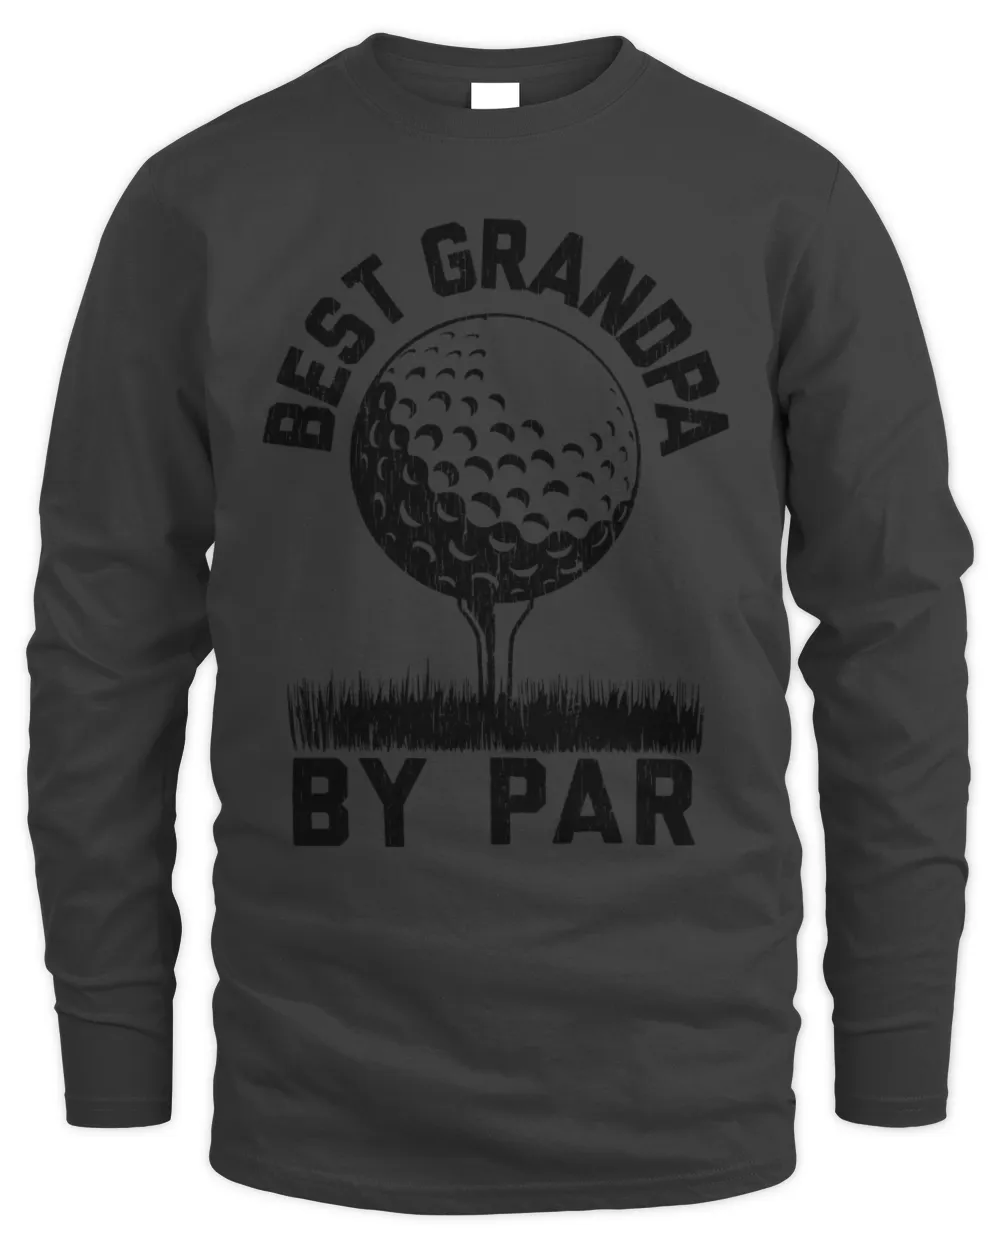 Best Grandpa By Par, Grandpa Golf Shirts, Dad Gift Ideas, Best Dad Ever Shirt, Fathers Day Gift, Funny Shirt For Dads, Golfing Grandpa